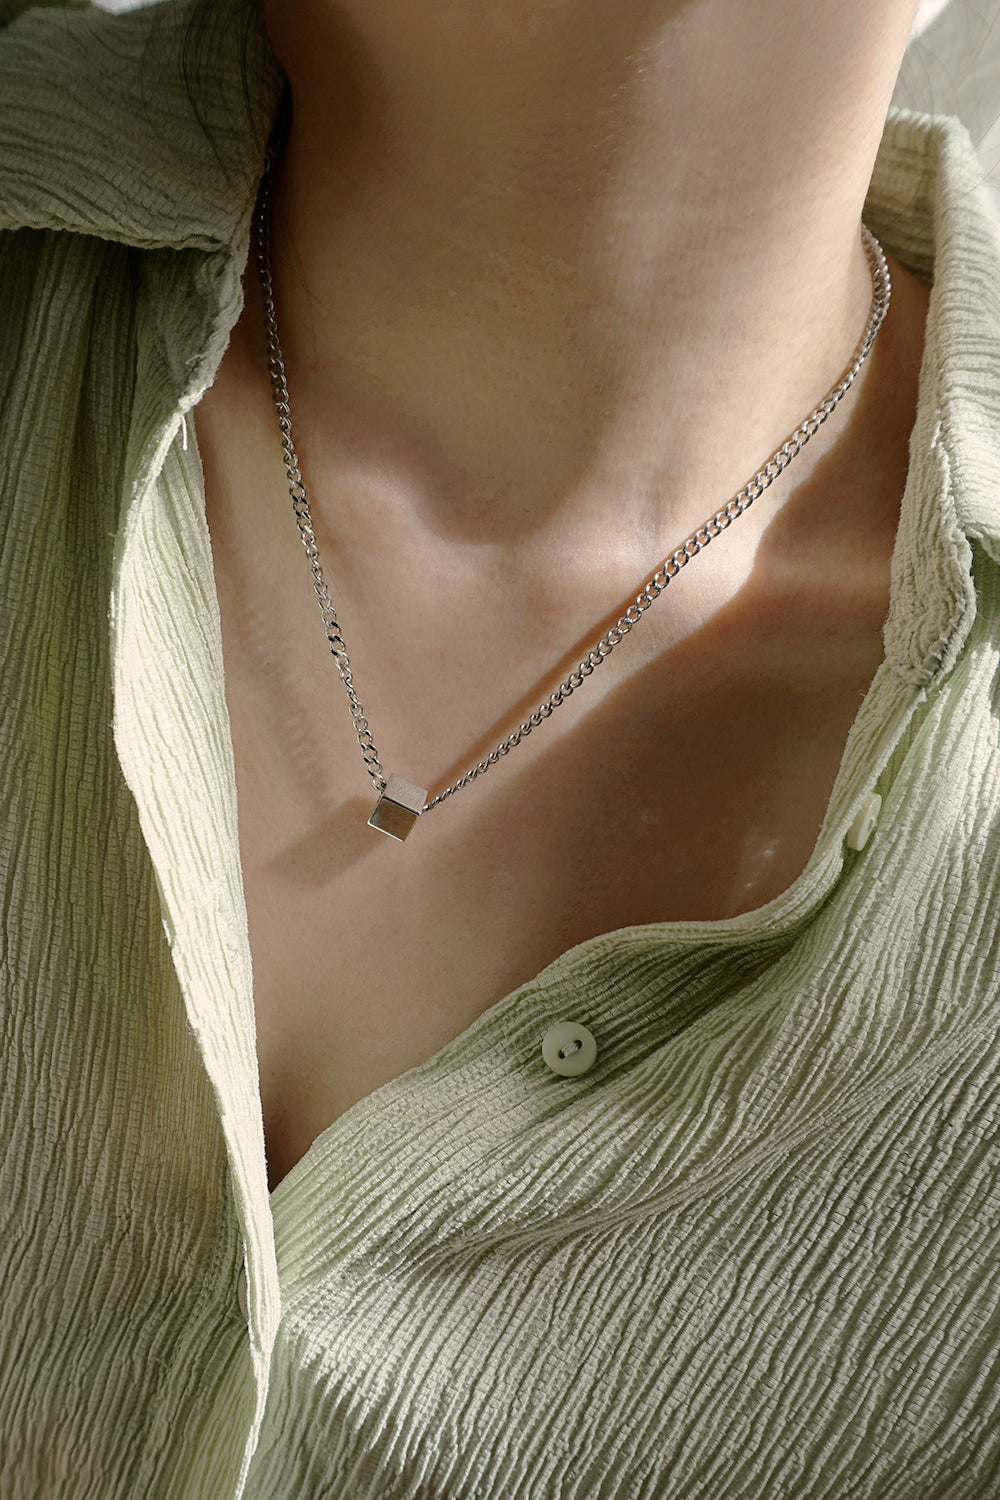 Cube Necklace Single LONG - OLA | 3d printed jewelry